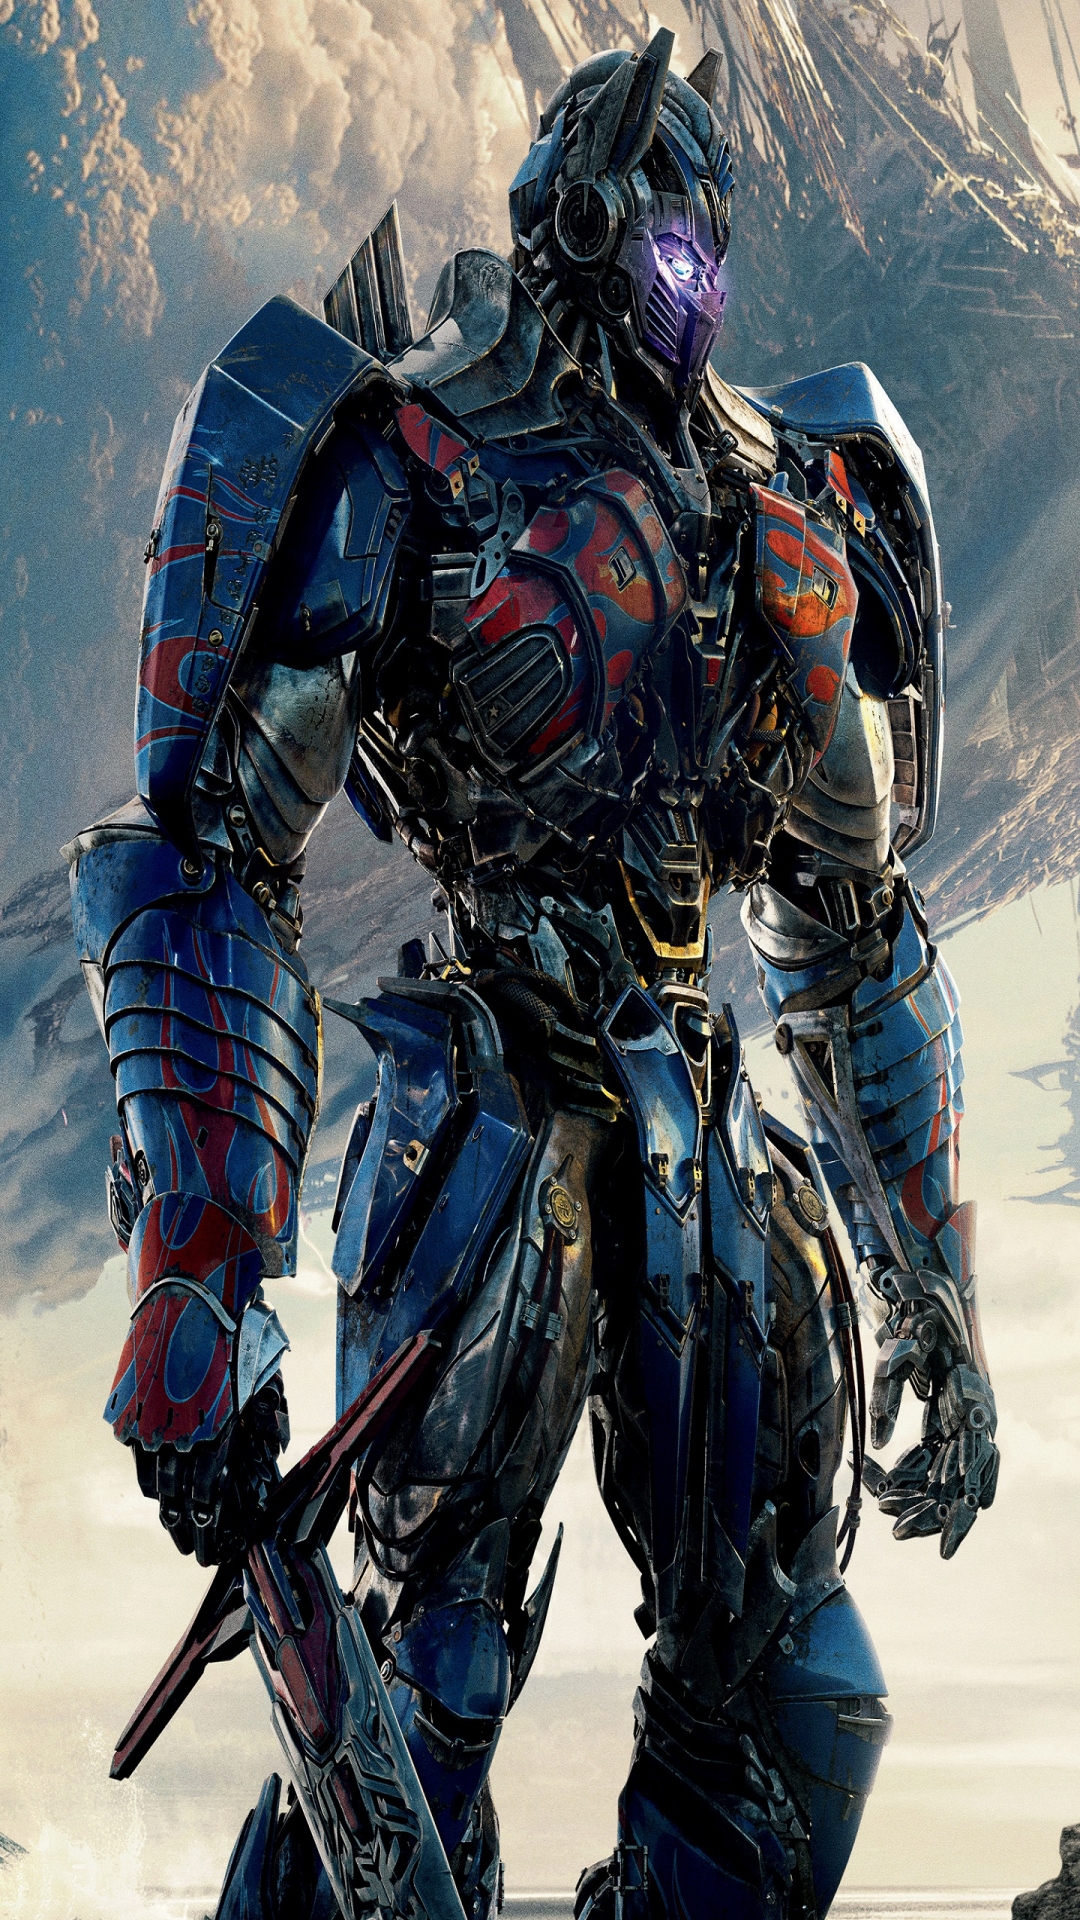 Optimus Prime Transformers The Last Knight for Samsung A9 Pro & A7 resolution